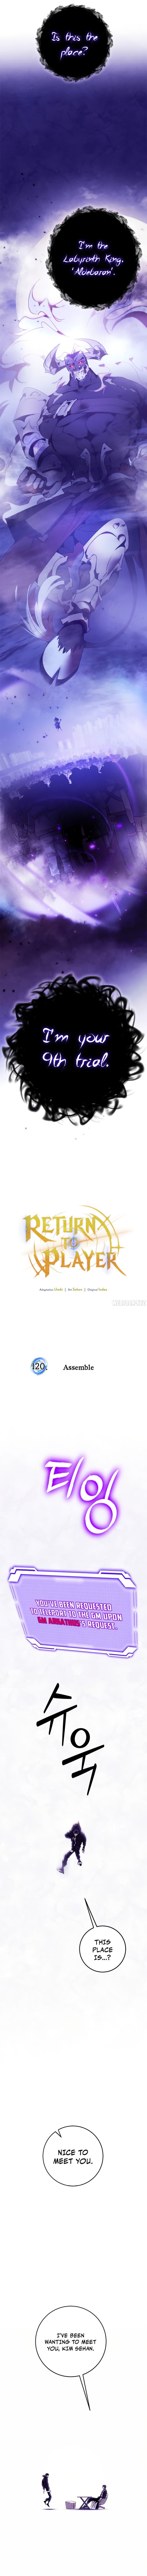 return-to-player-chap-120-5